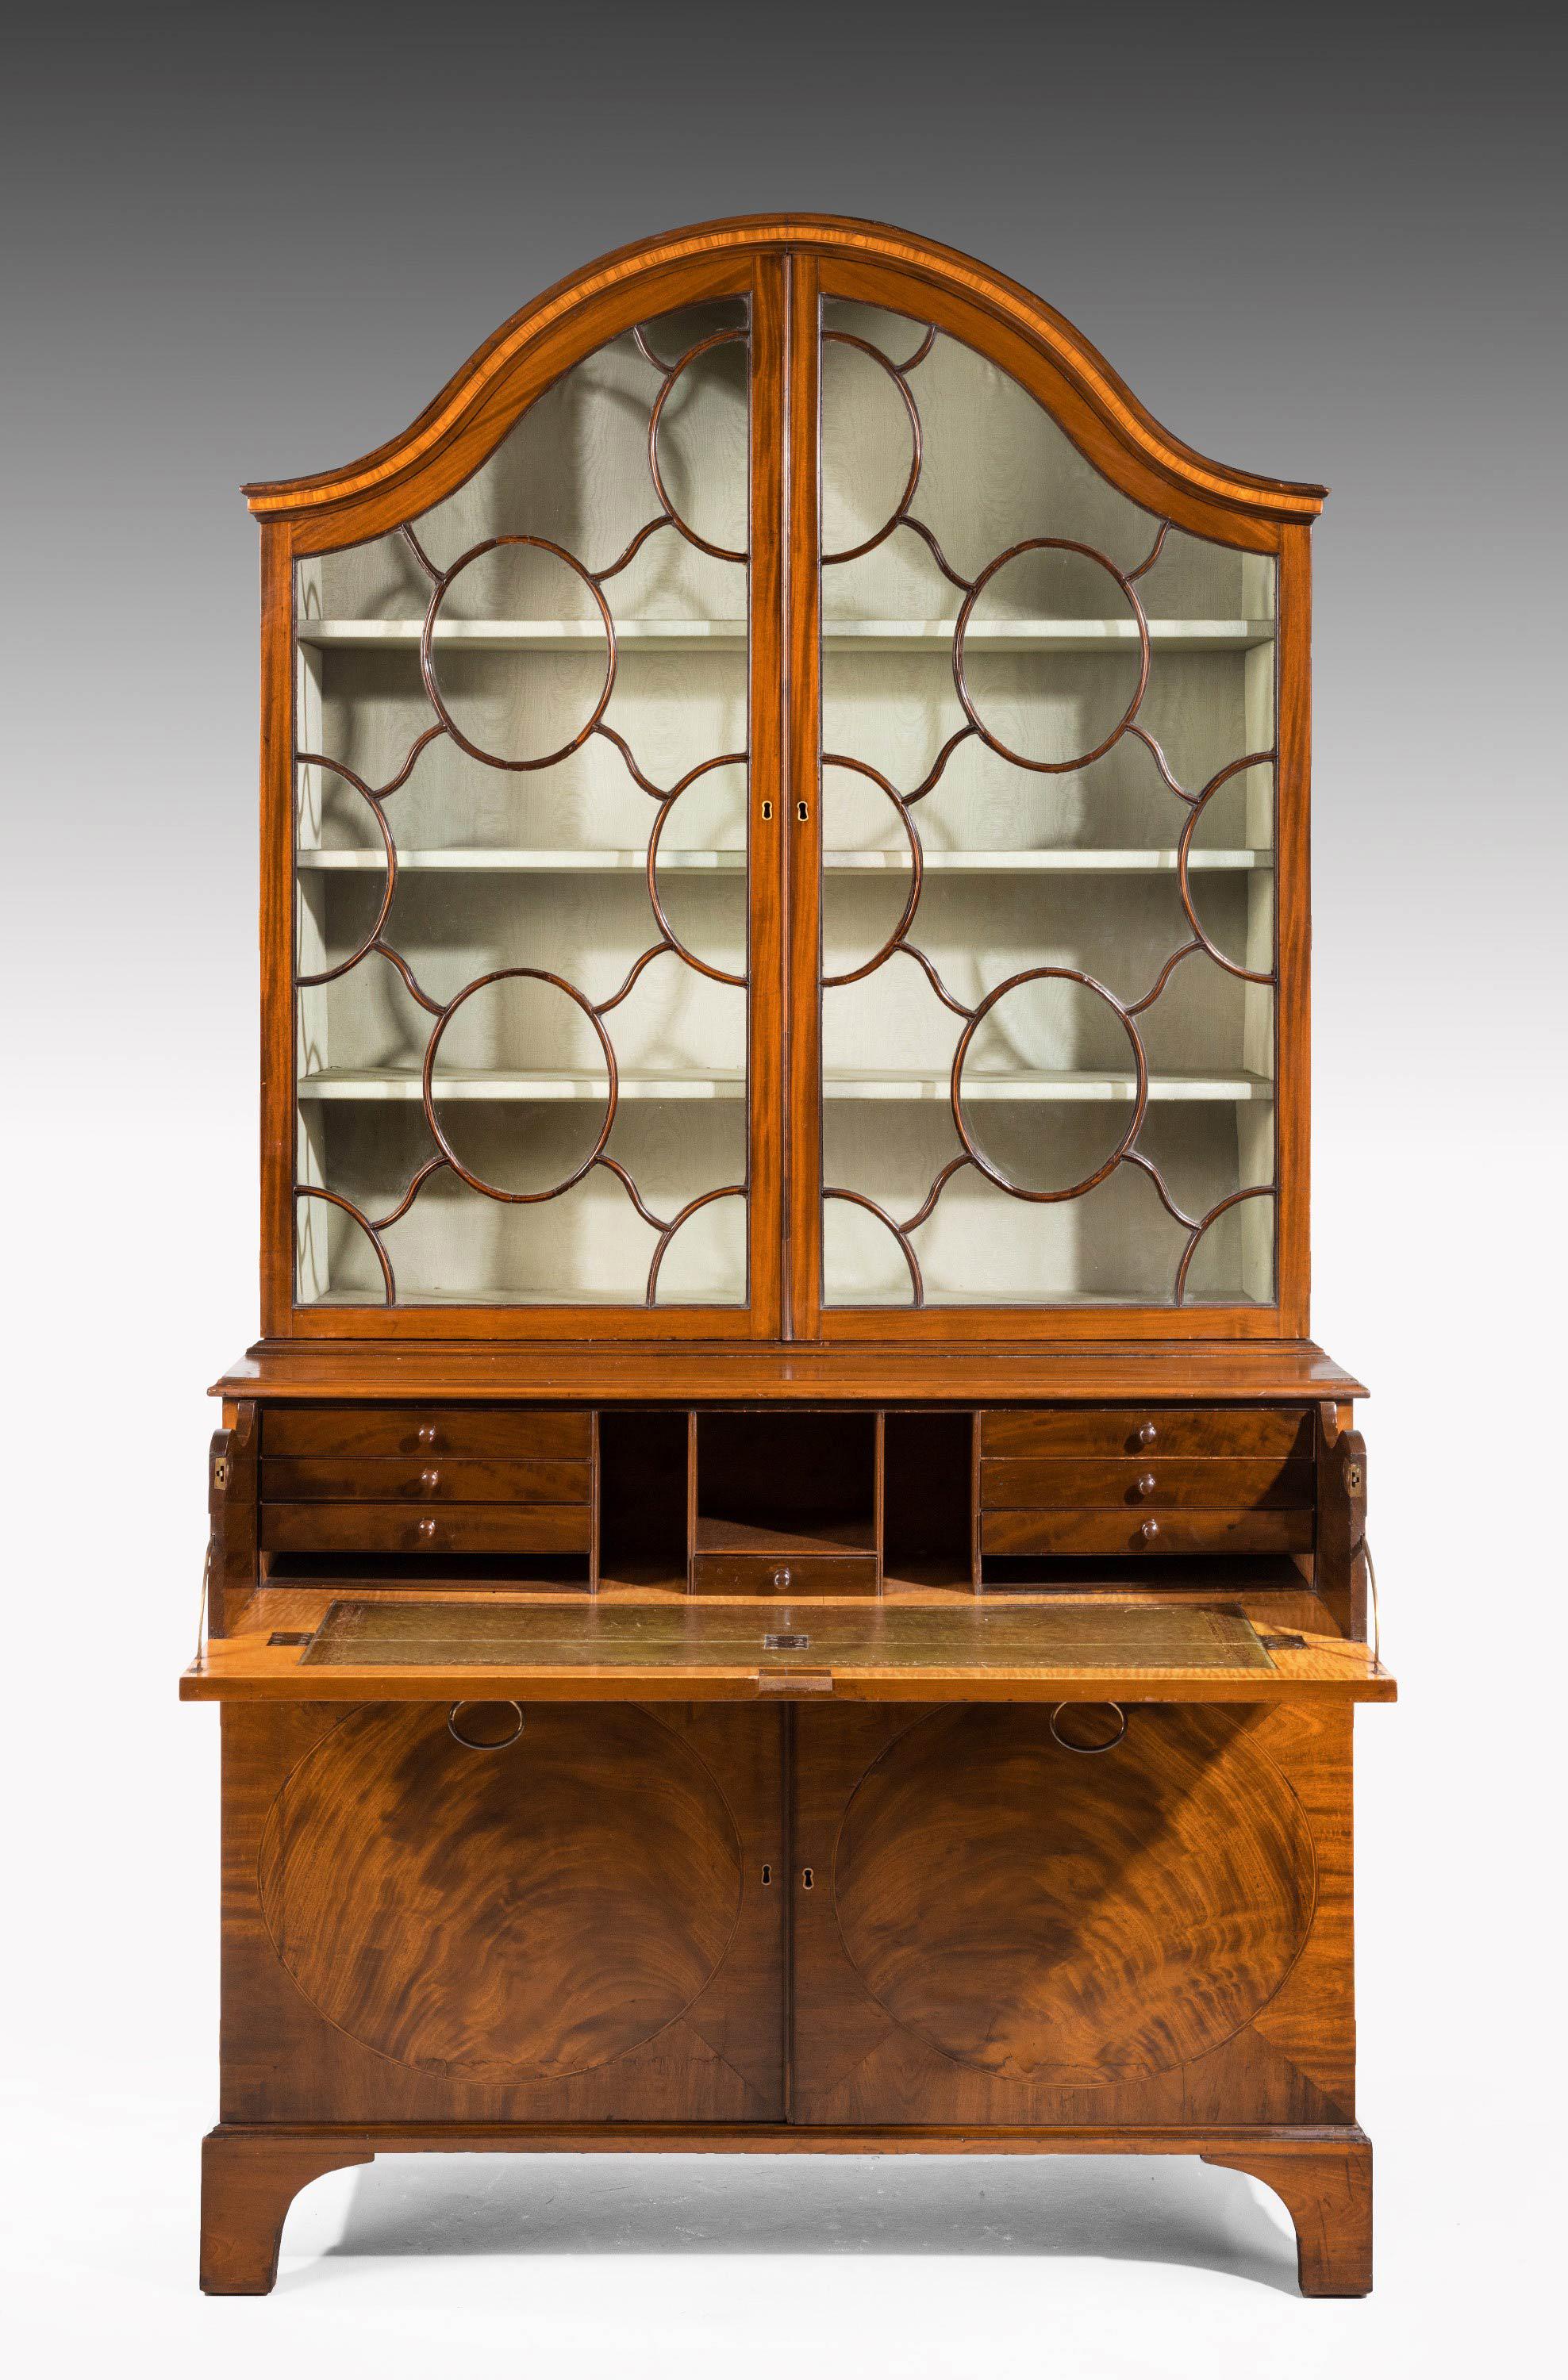 A most unusual George III period mahogany secretaire bookcase. The domed top with beautifully formed astrals involving oval and contrasting panels. The interior with pigeon holes, drawers and an inset leather top. The base with enclosing two doors